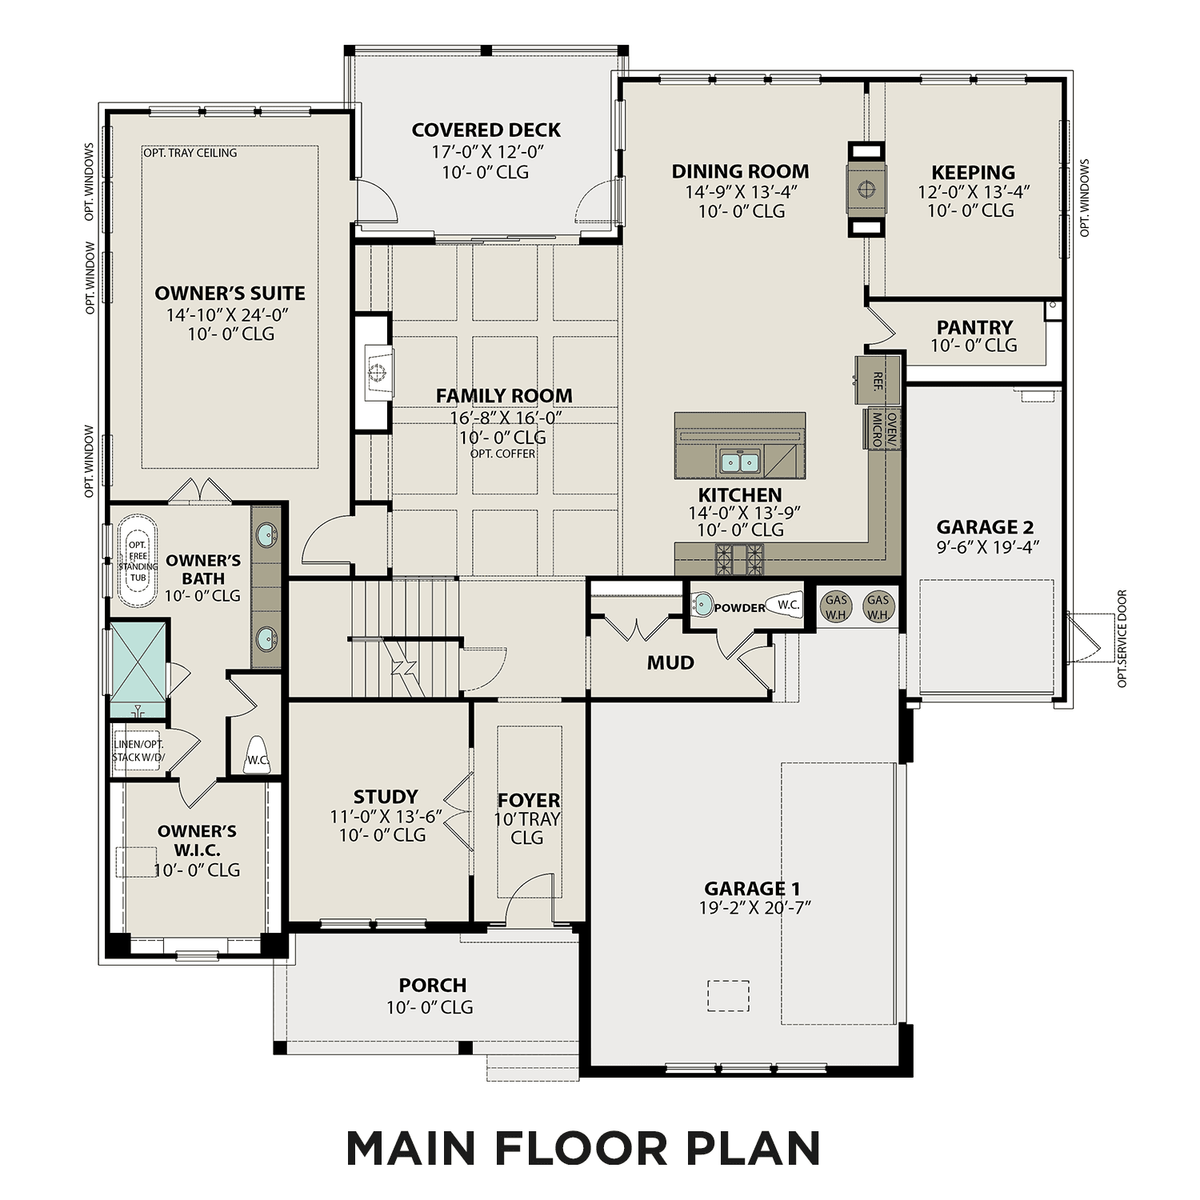 1 - The Albany A floor plan layout for 5406 Maroon Drive in Davidson Homes' Shelton Square community.